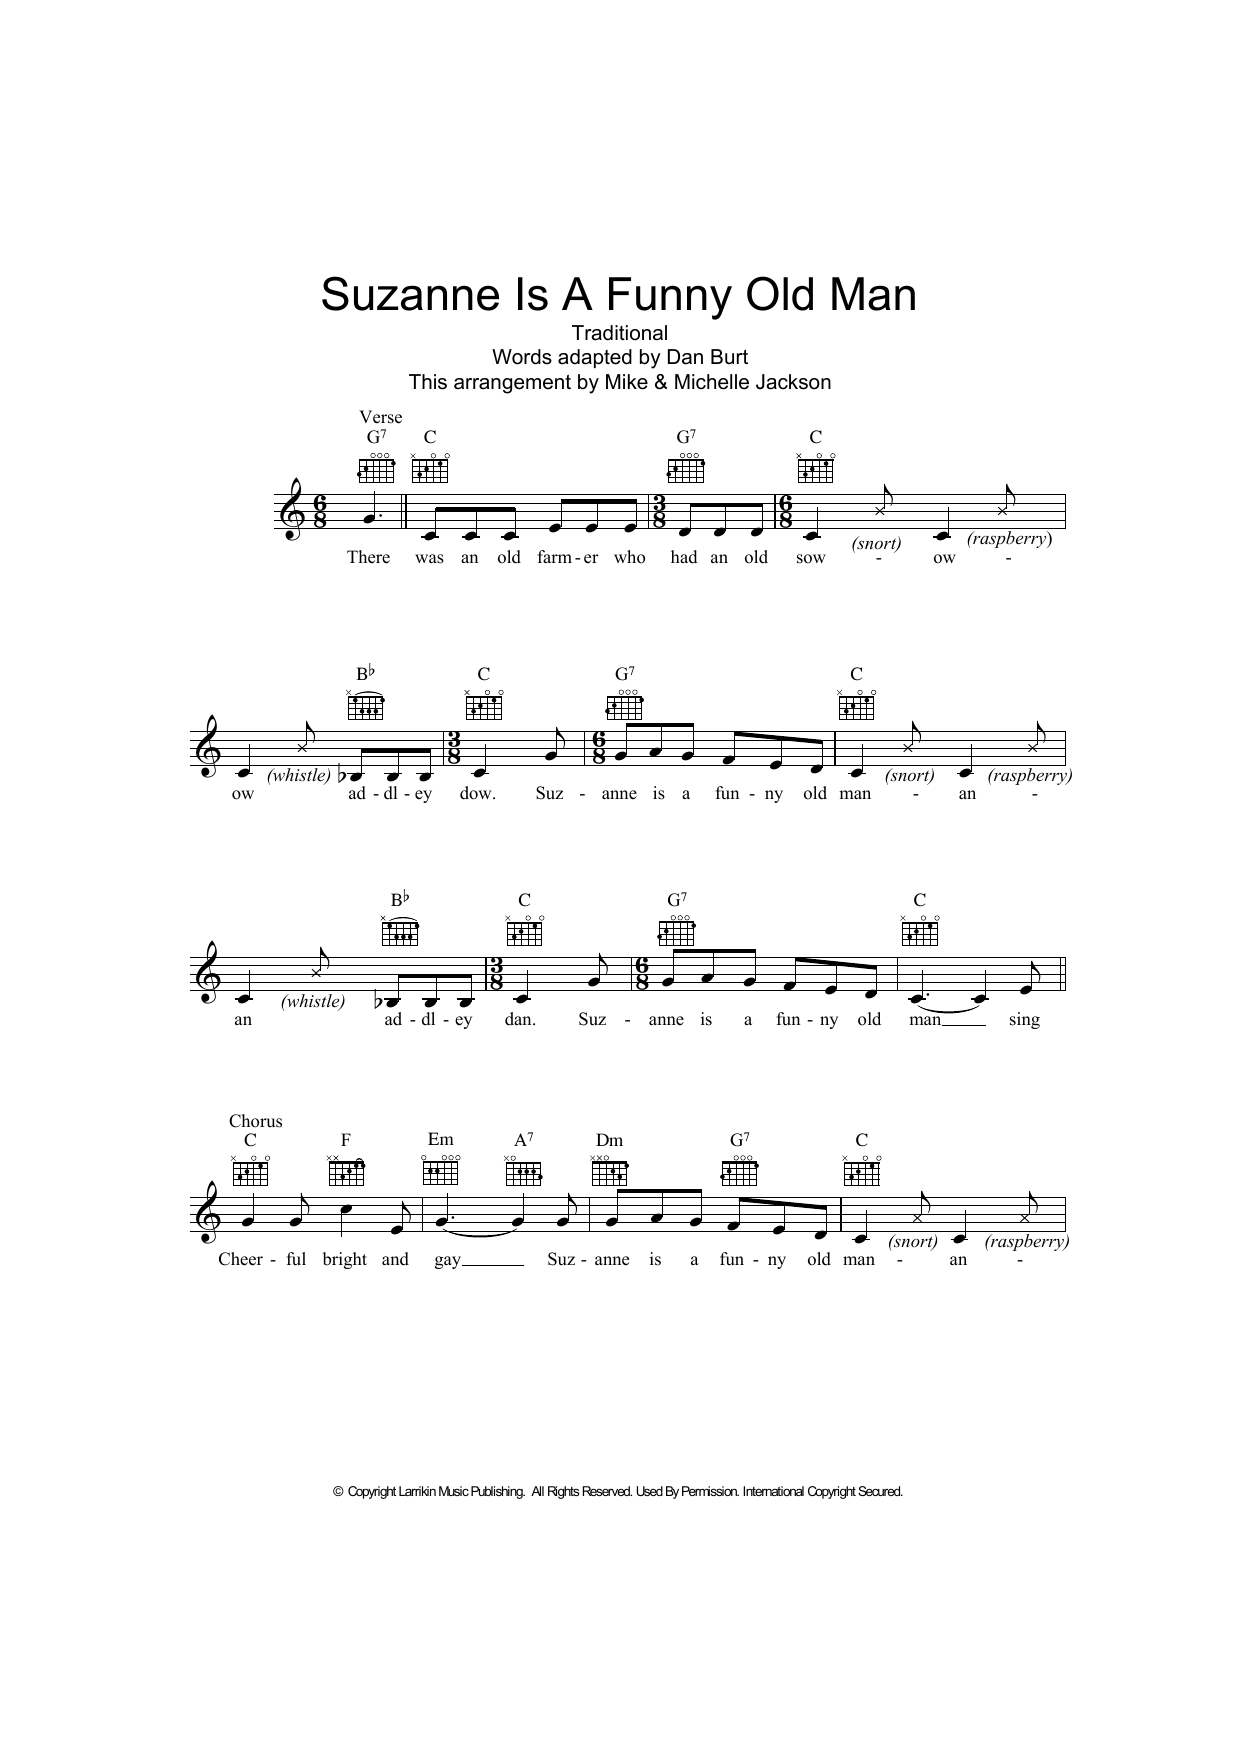 Download Traditional Suzanne Is A Funny Old Man Sheet Music